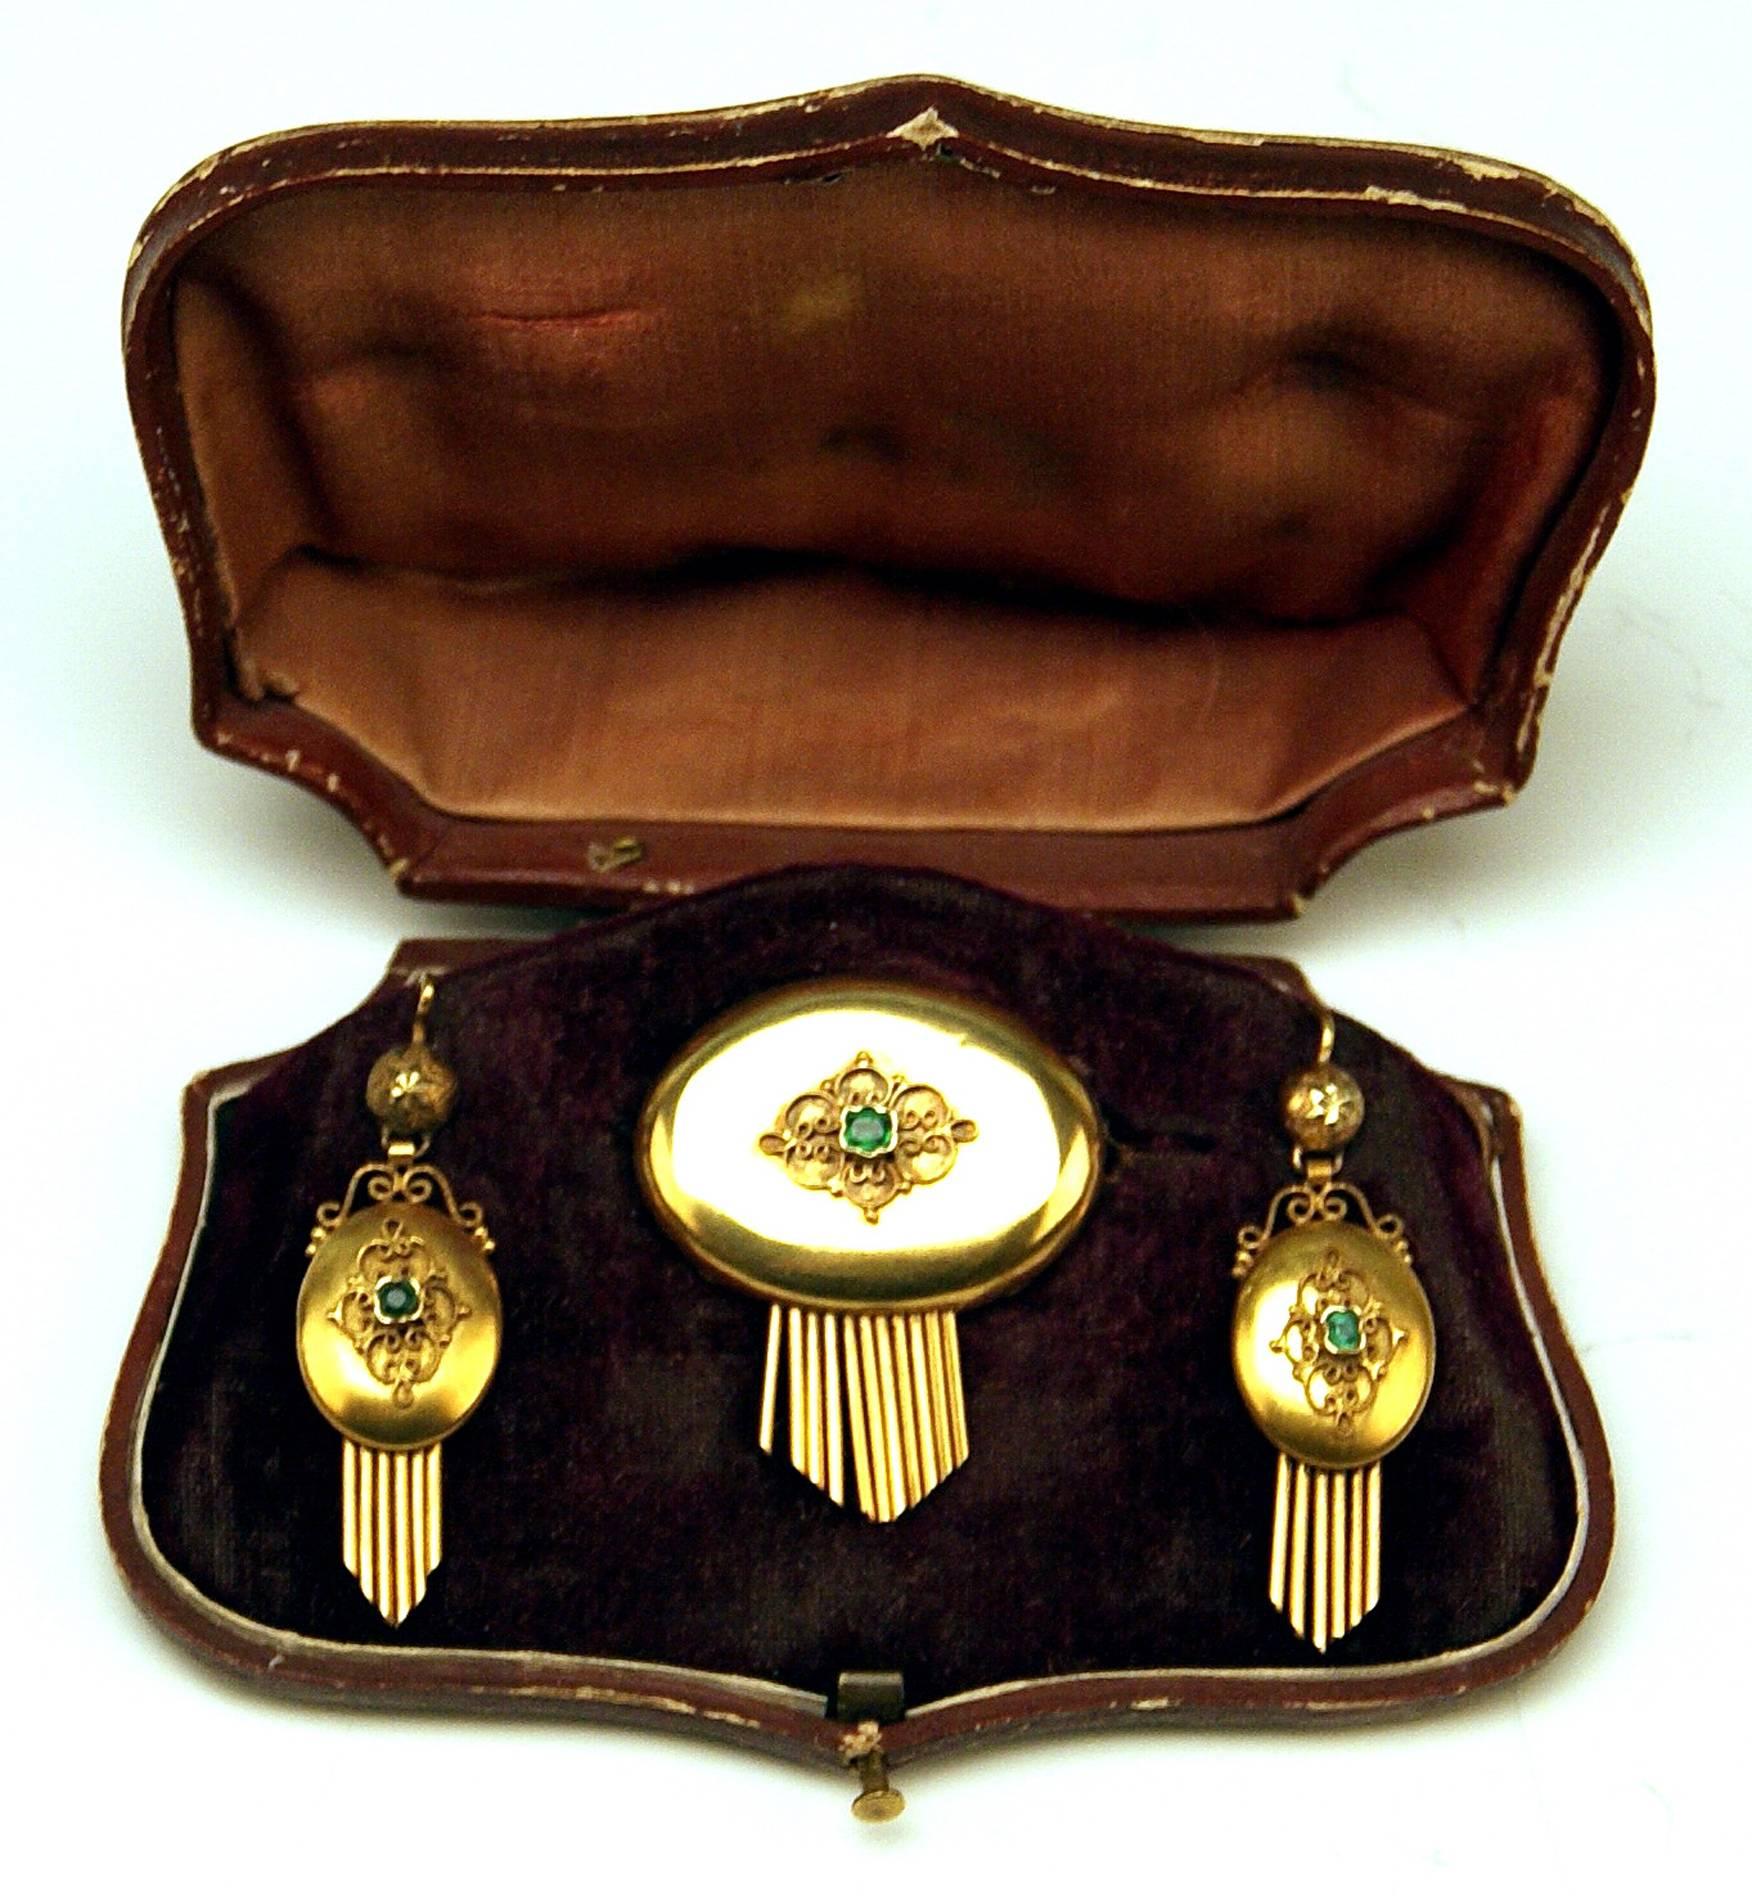 HIGH VICTORIAN (= VIENNESE HISTORICISM) GOLDEN JEWELRY SET:
PAIR OF EARDROPS AND BROOCH MADE OF GOLD 14ct, COVERED WITH SMALL EMERALDS.

ELEGANT BROOCH:
made of GOLD  (14 ct / 585), having longitudinal-oval form, additionally decorated with small